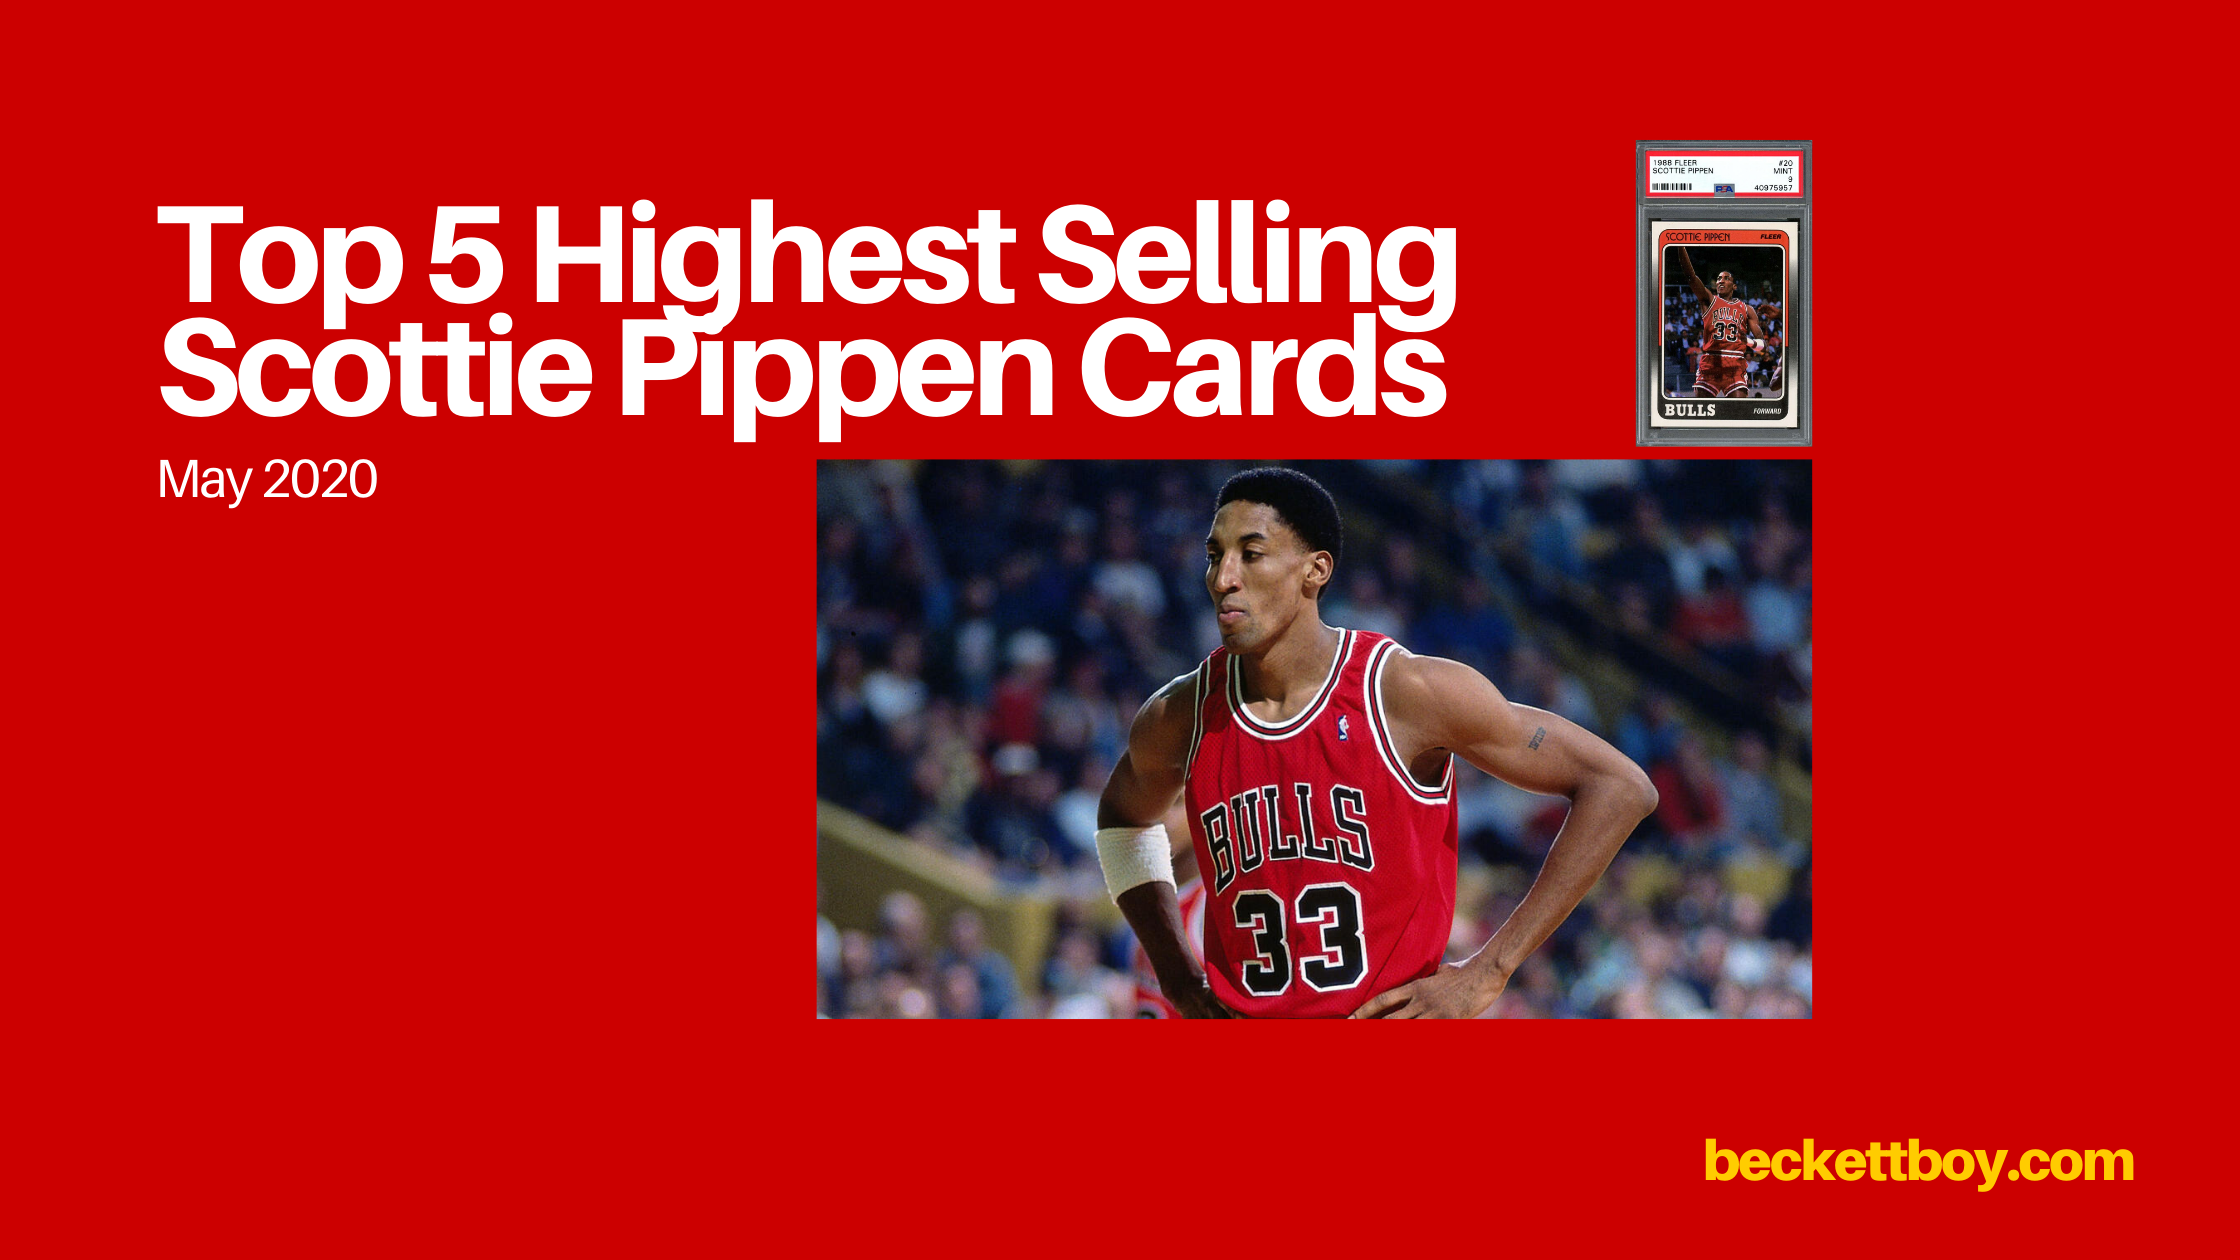 Top 5 Highest Selling Scottie Pippen Cards for May 2020